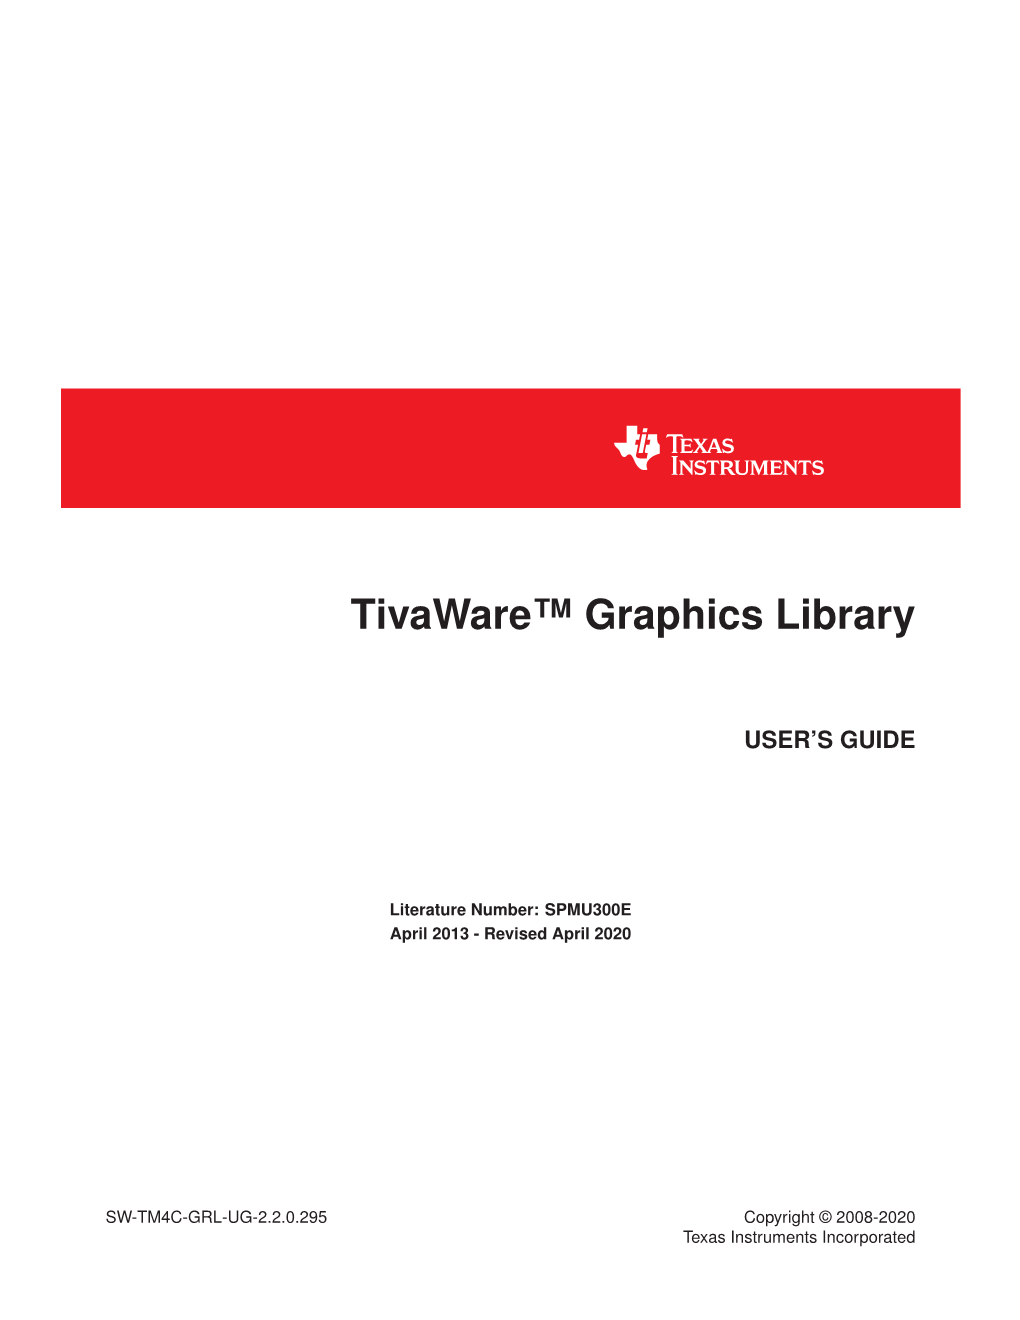 Tivaware™ Graphics Library for C Series User's